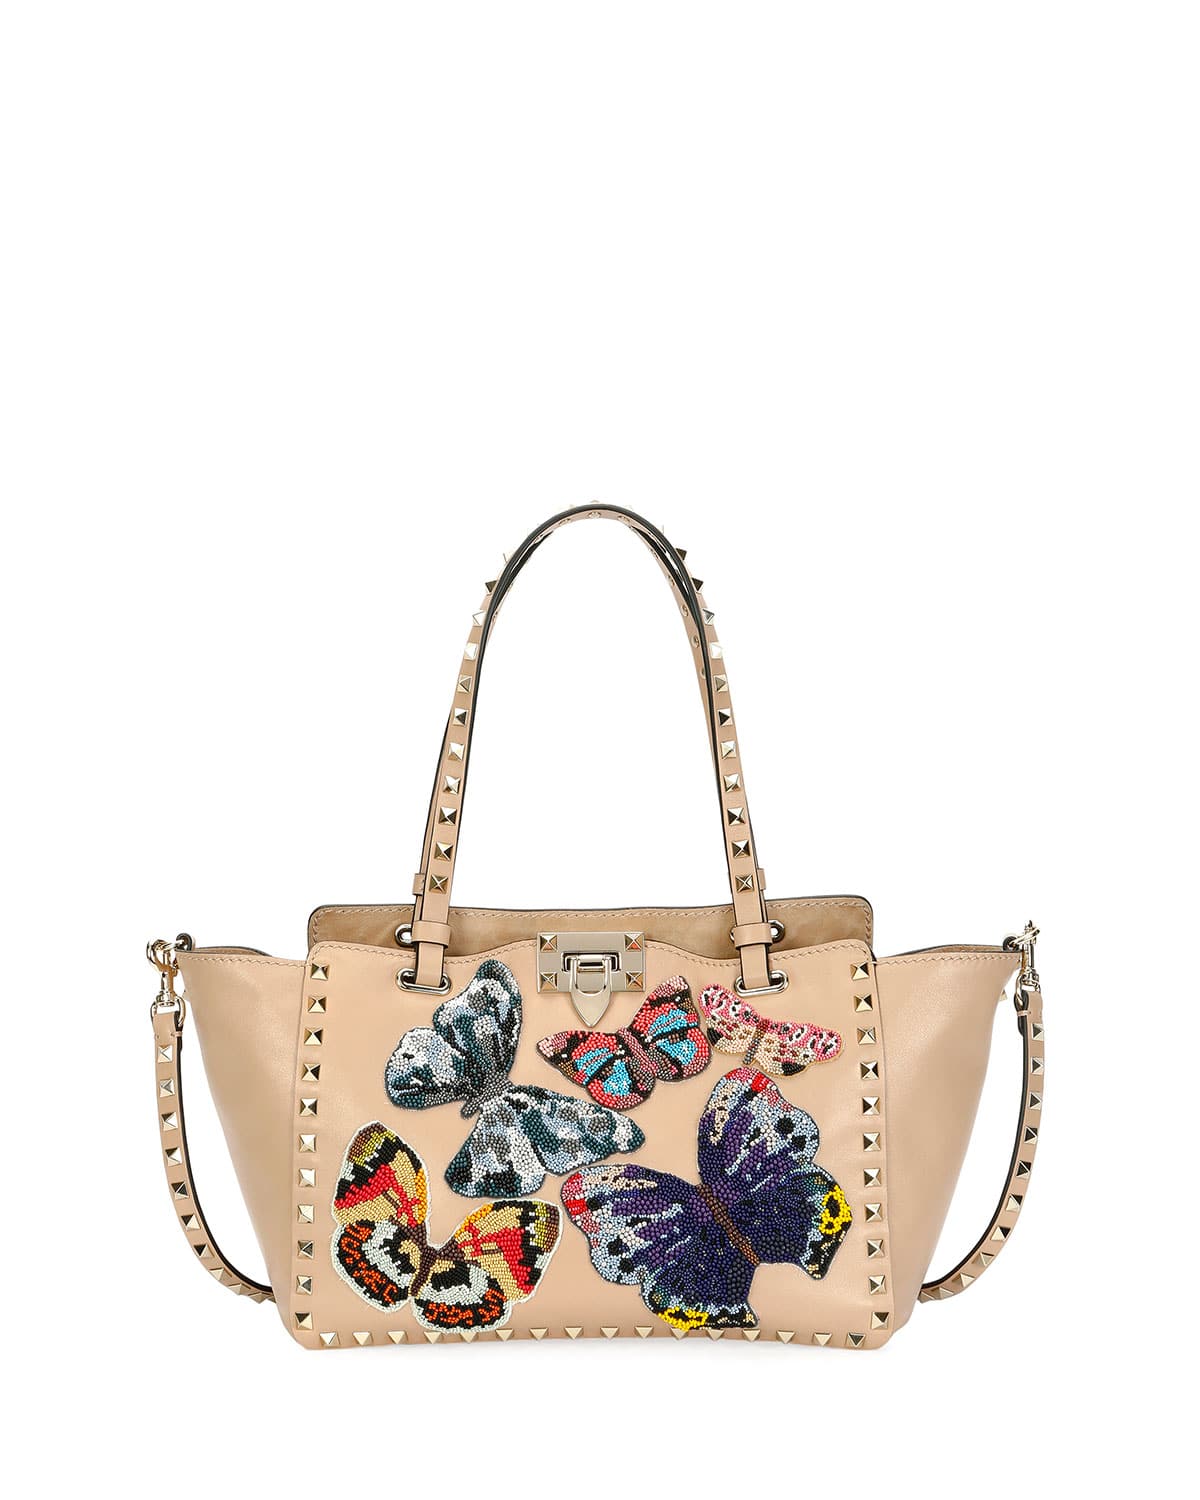 Valentino Bag Price List Reference Guide - Spotted Fashion